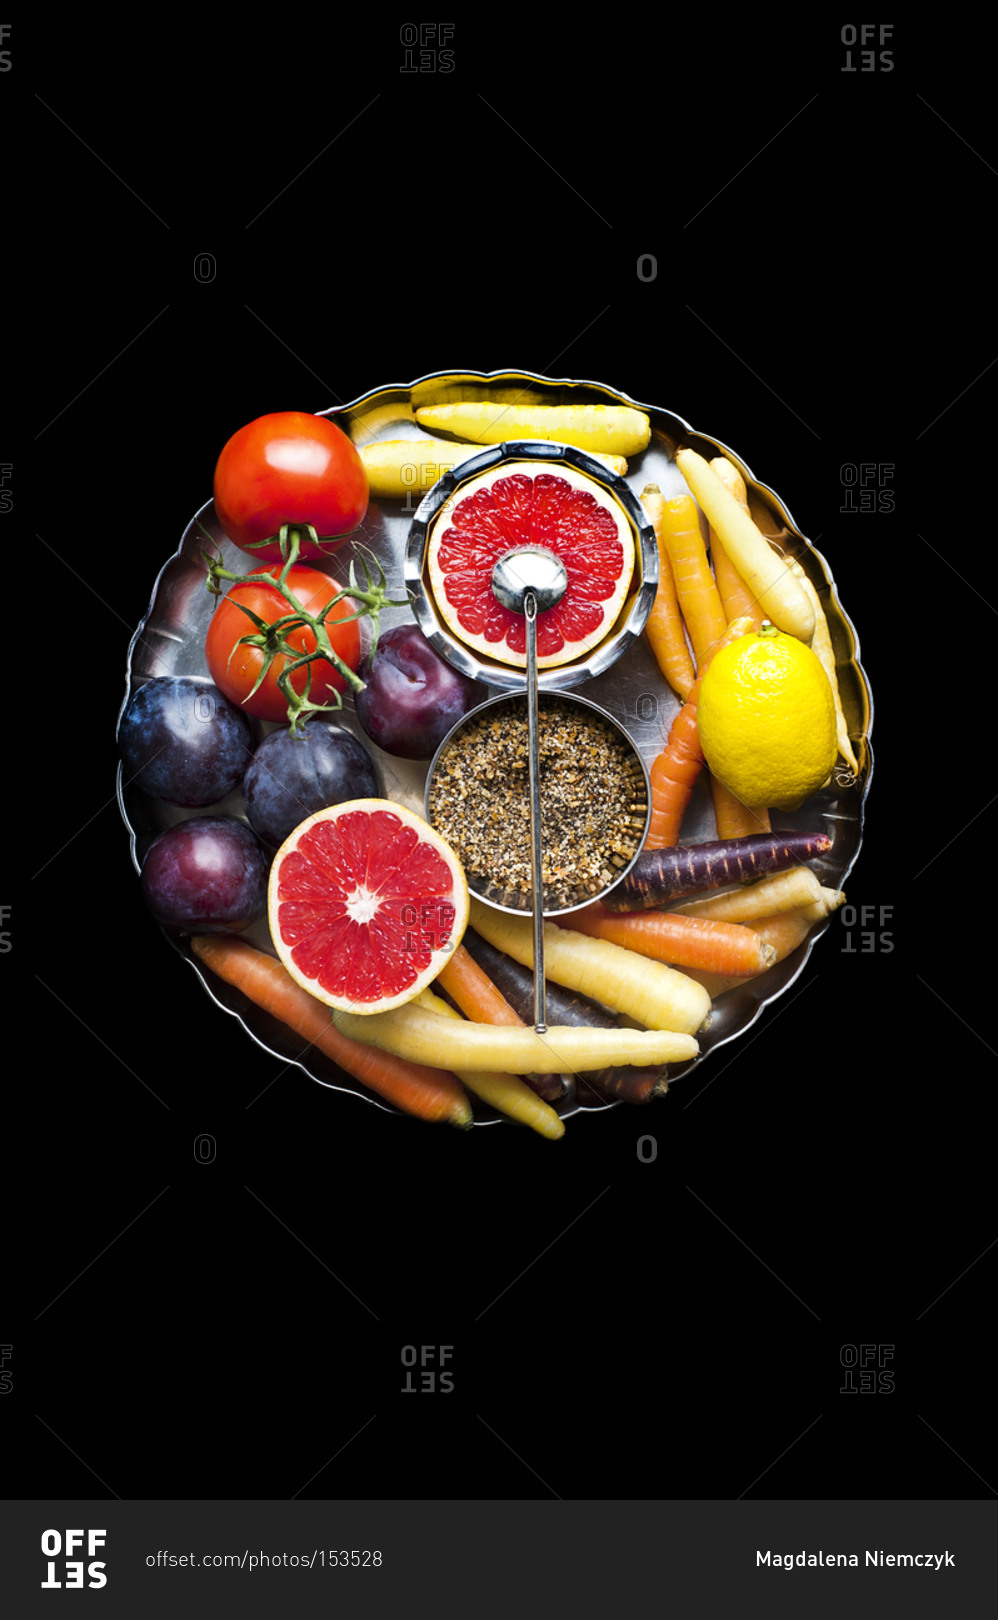 Top view of a plate full of fruits and vegetables